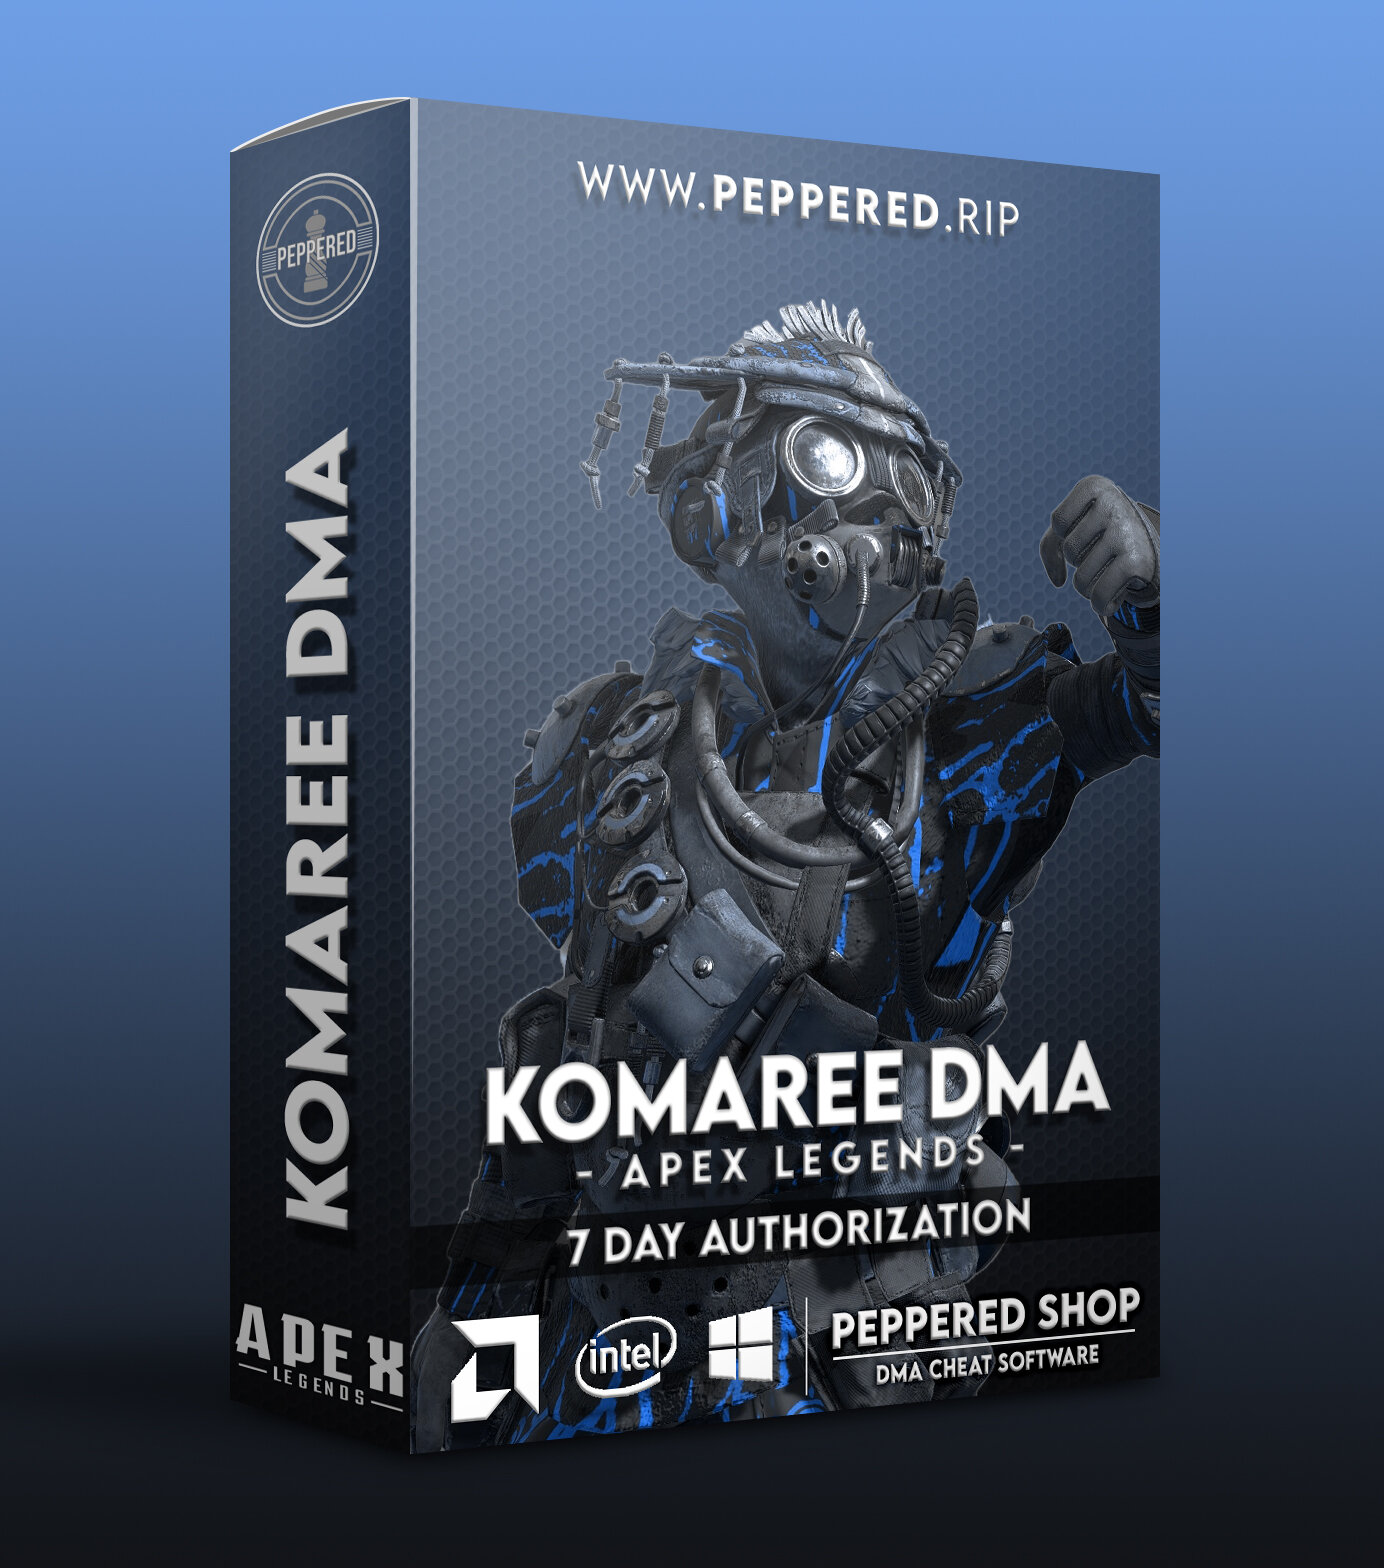 More information about "KO APEX 7 DAY"